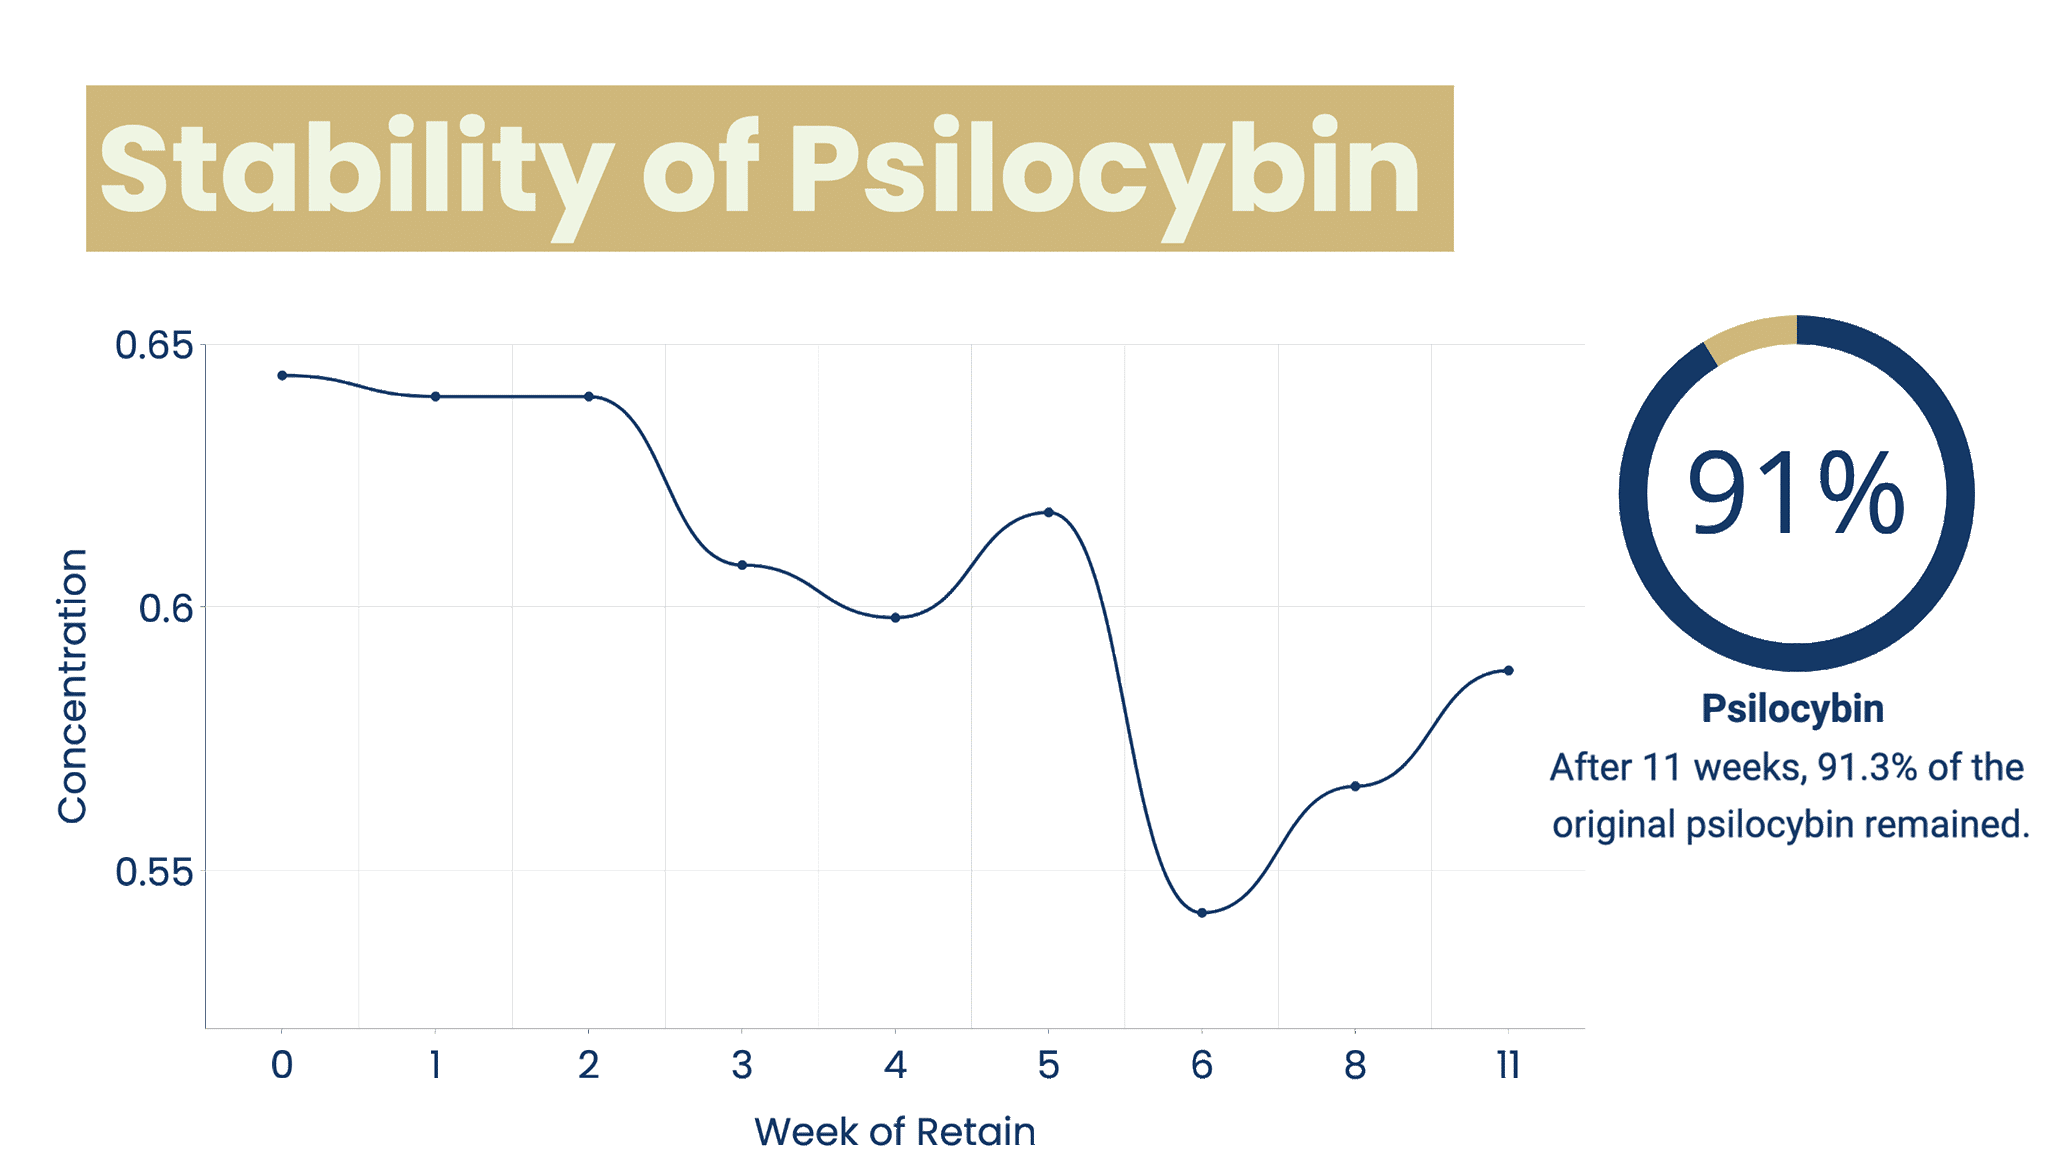 This is a graph showing the stability of psilocybin over the course of our 11 week study.